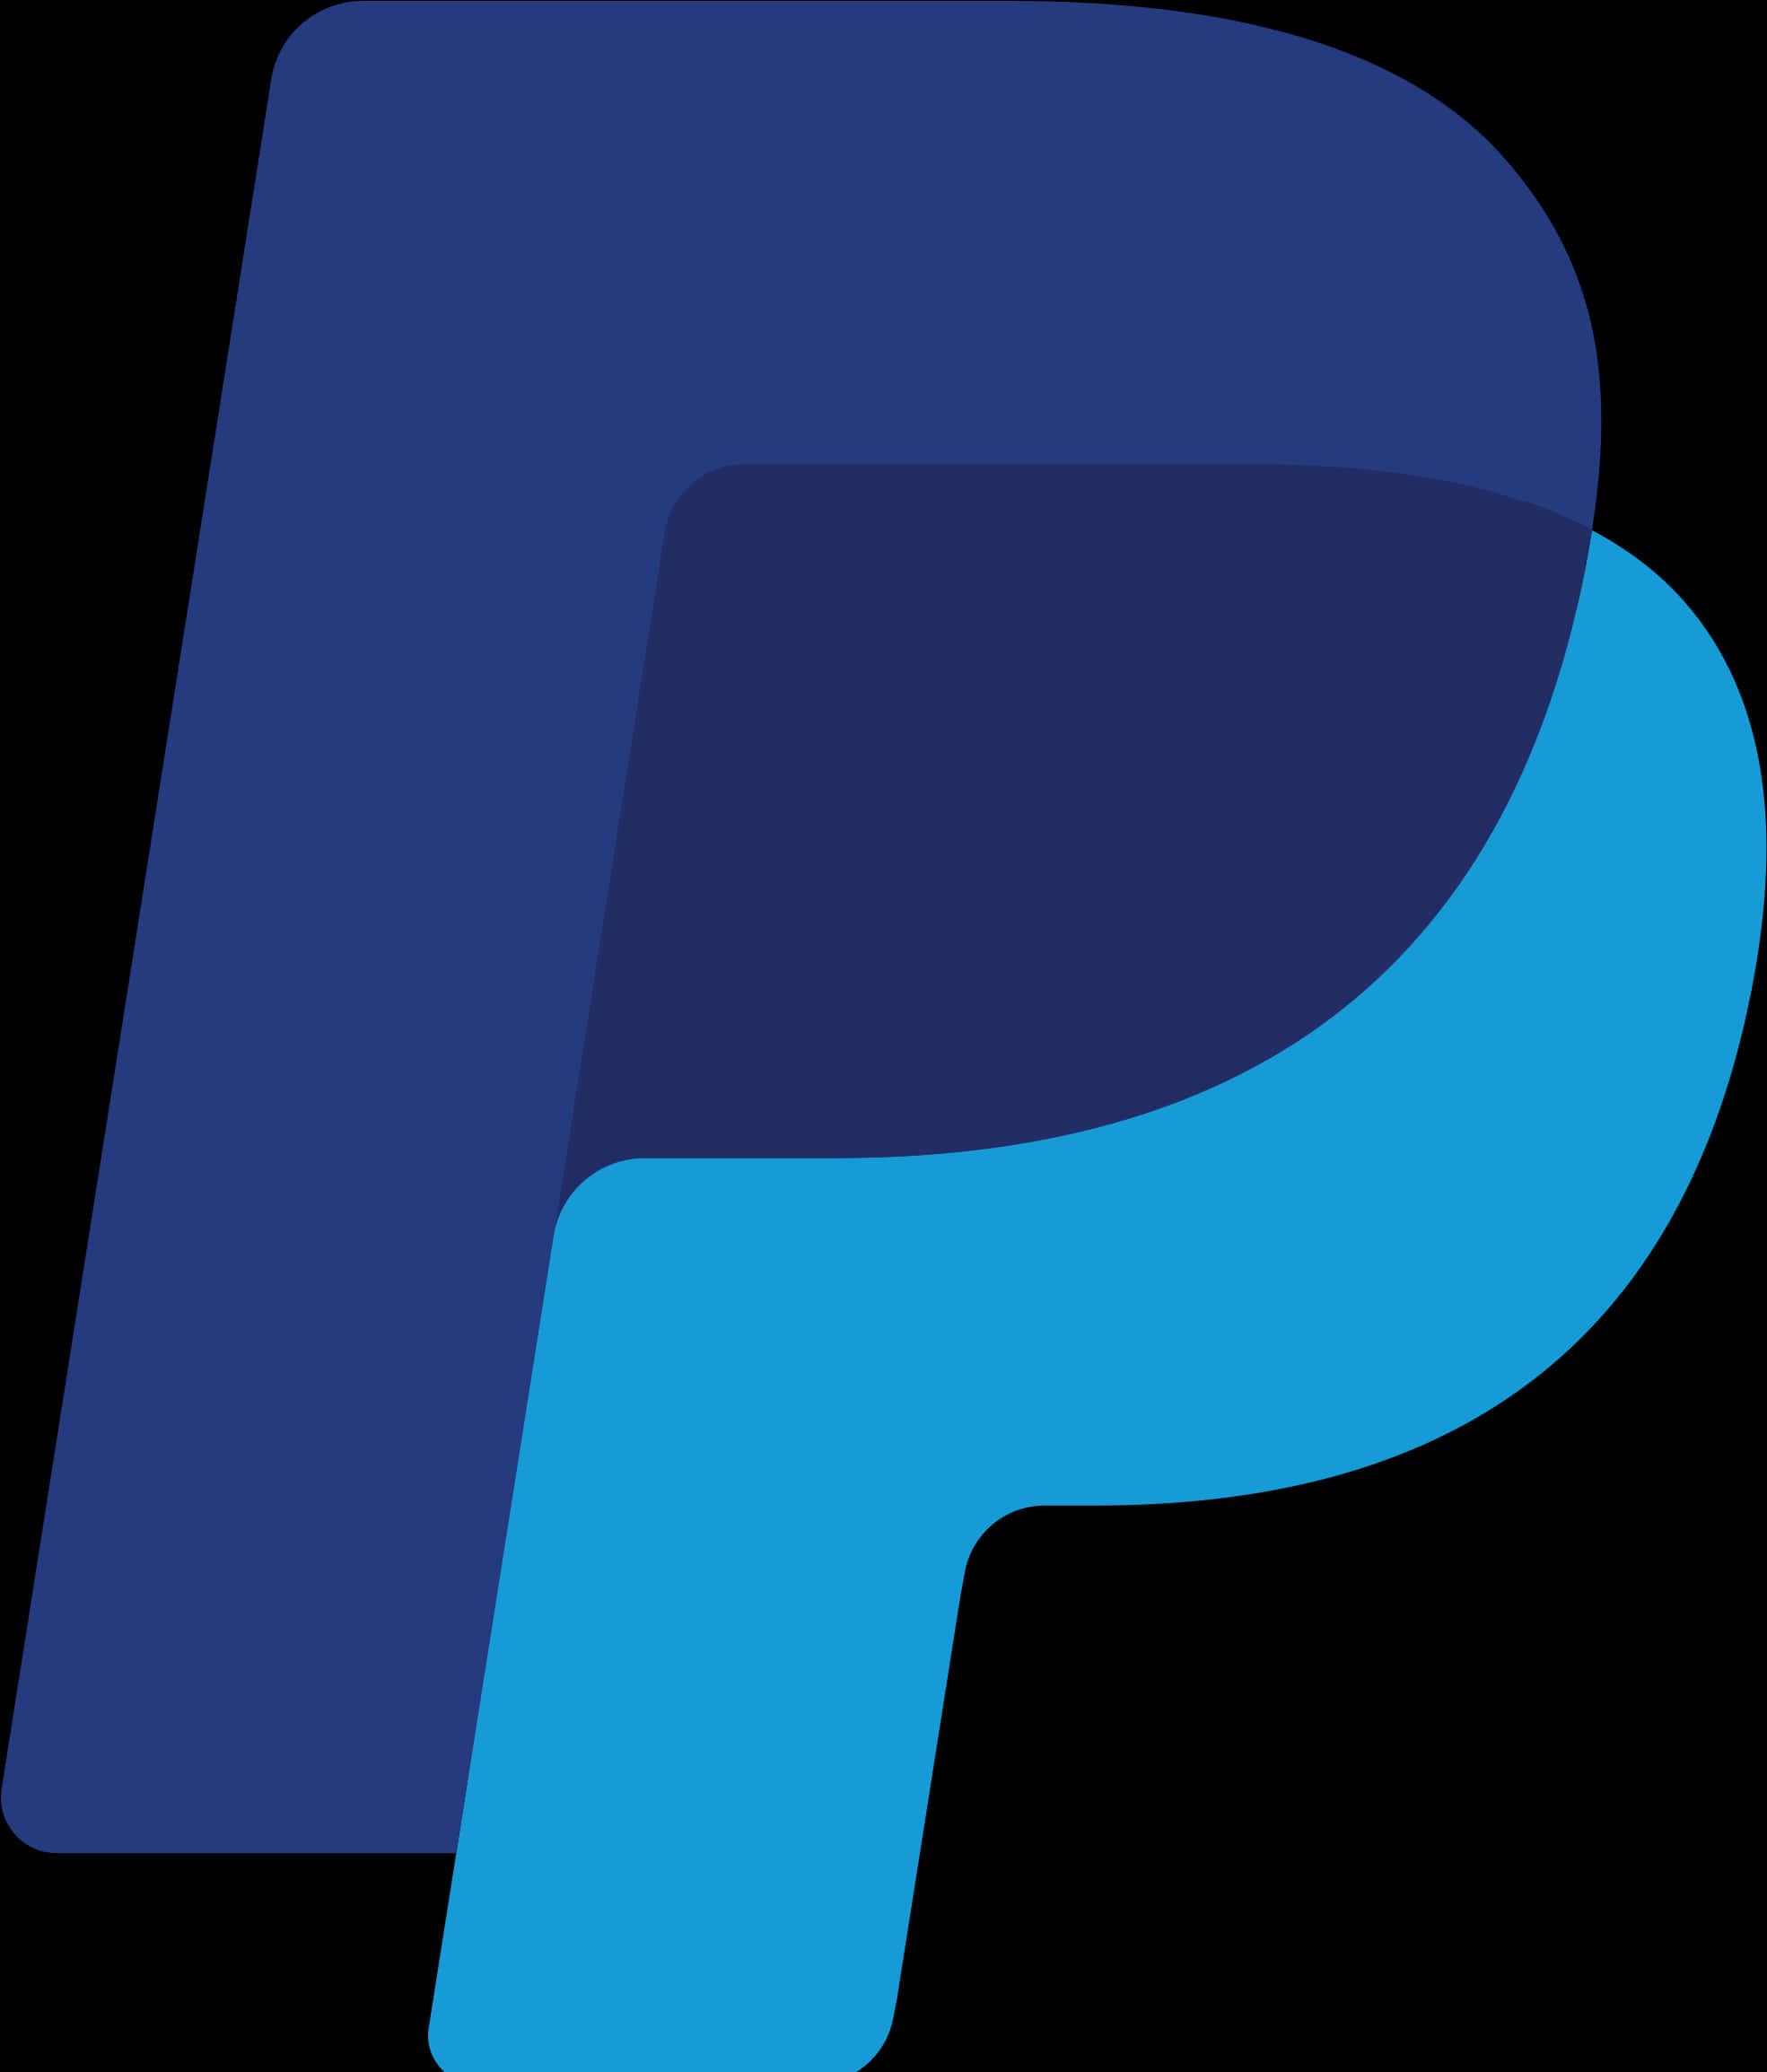 A Blue Letter P On A Black Background